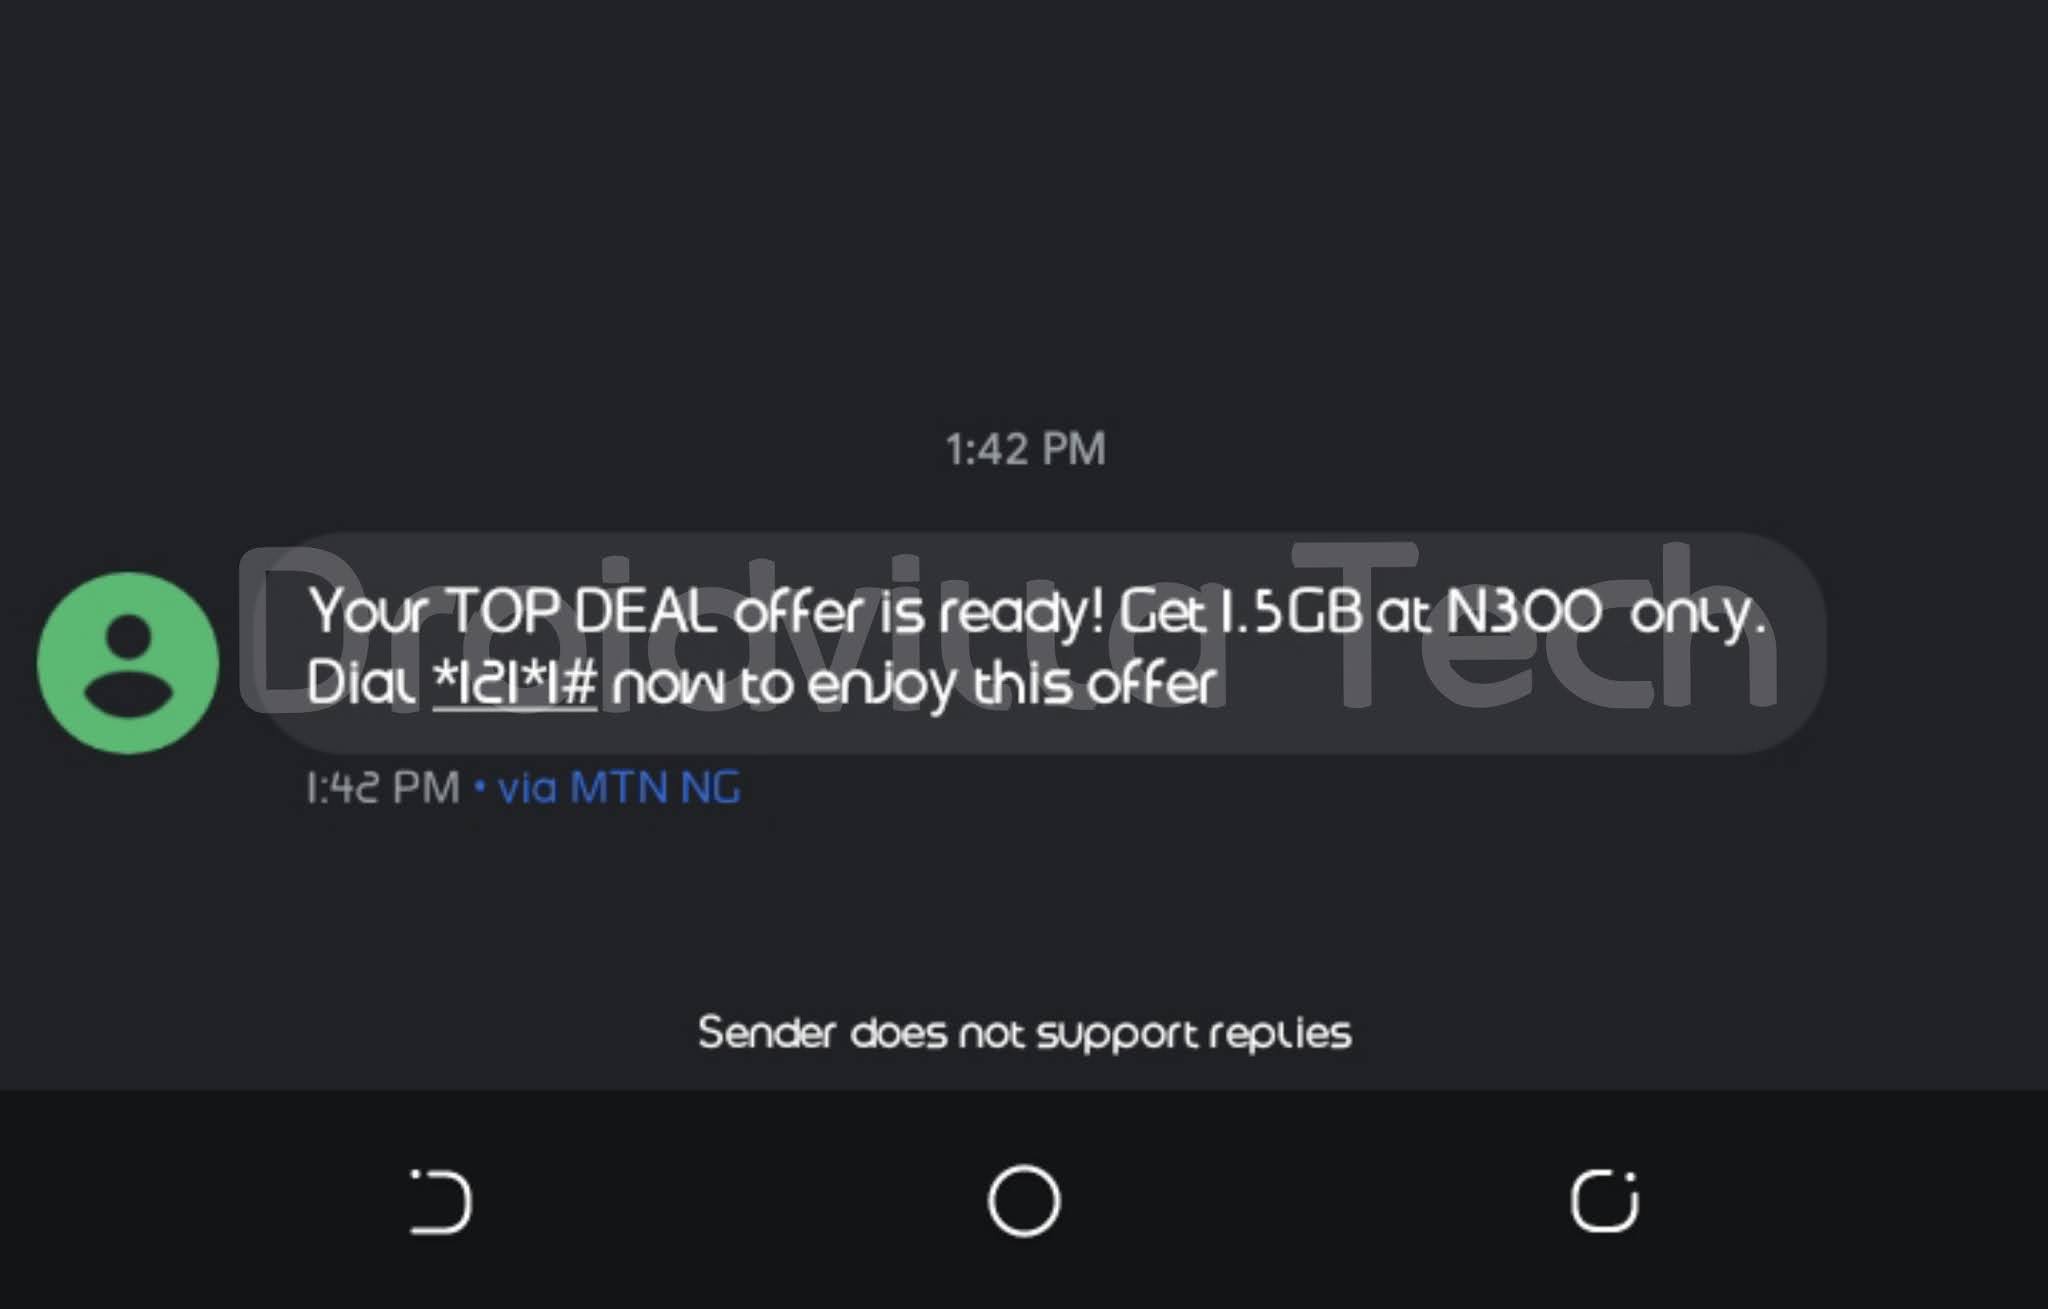 MTN 1.5gb for N300